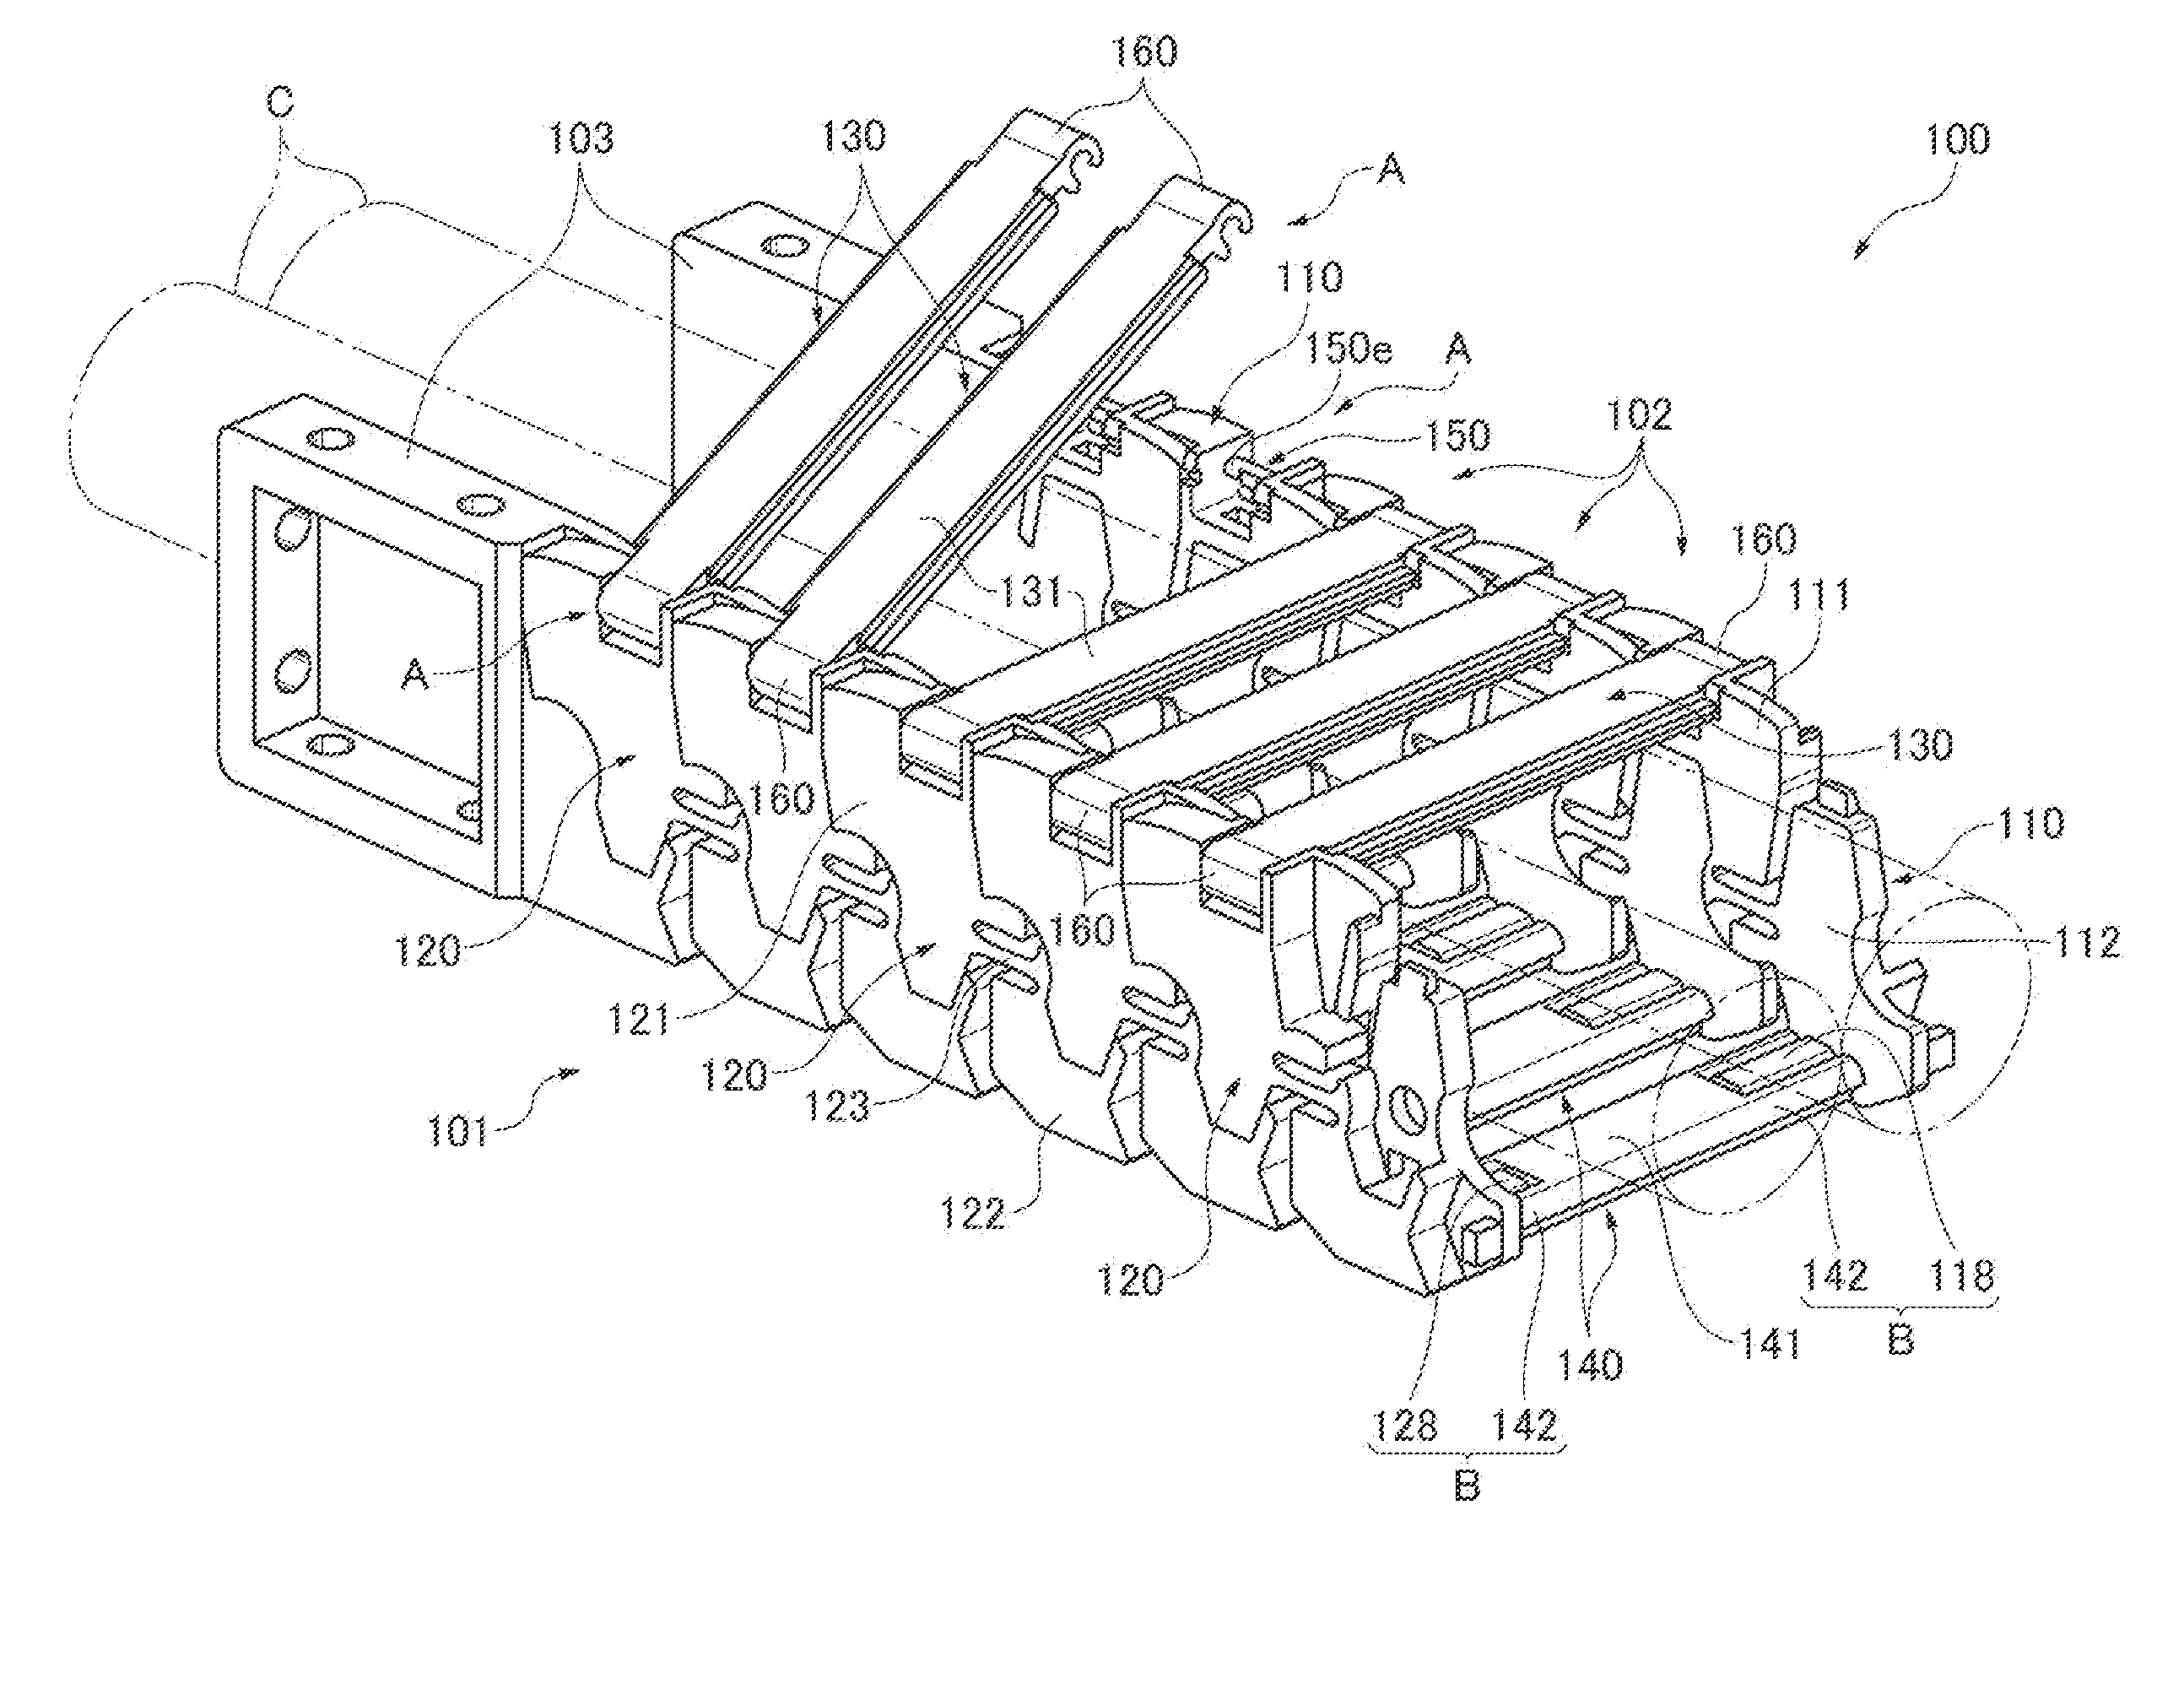 Cable protection and guide apparatus